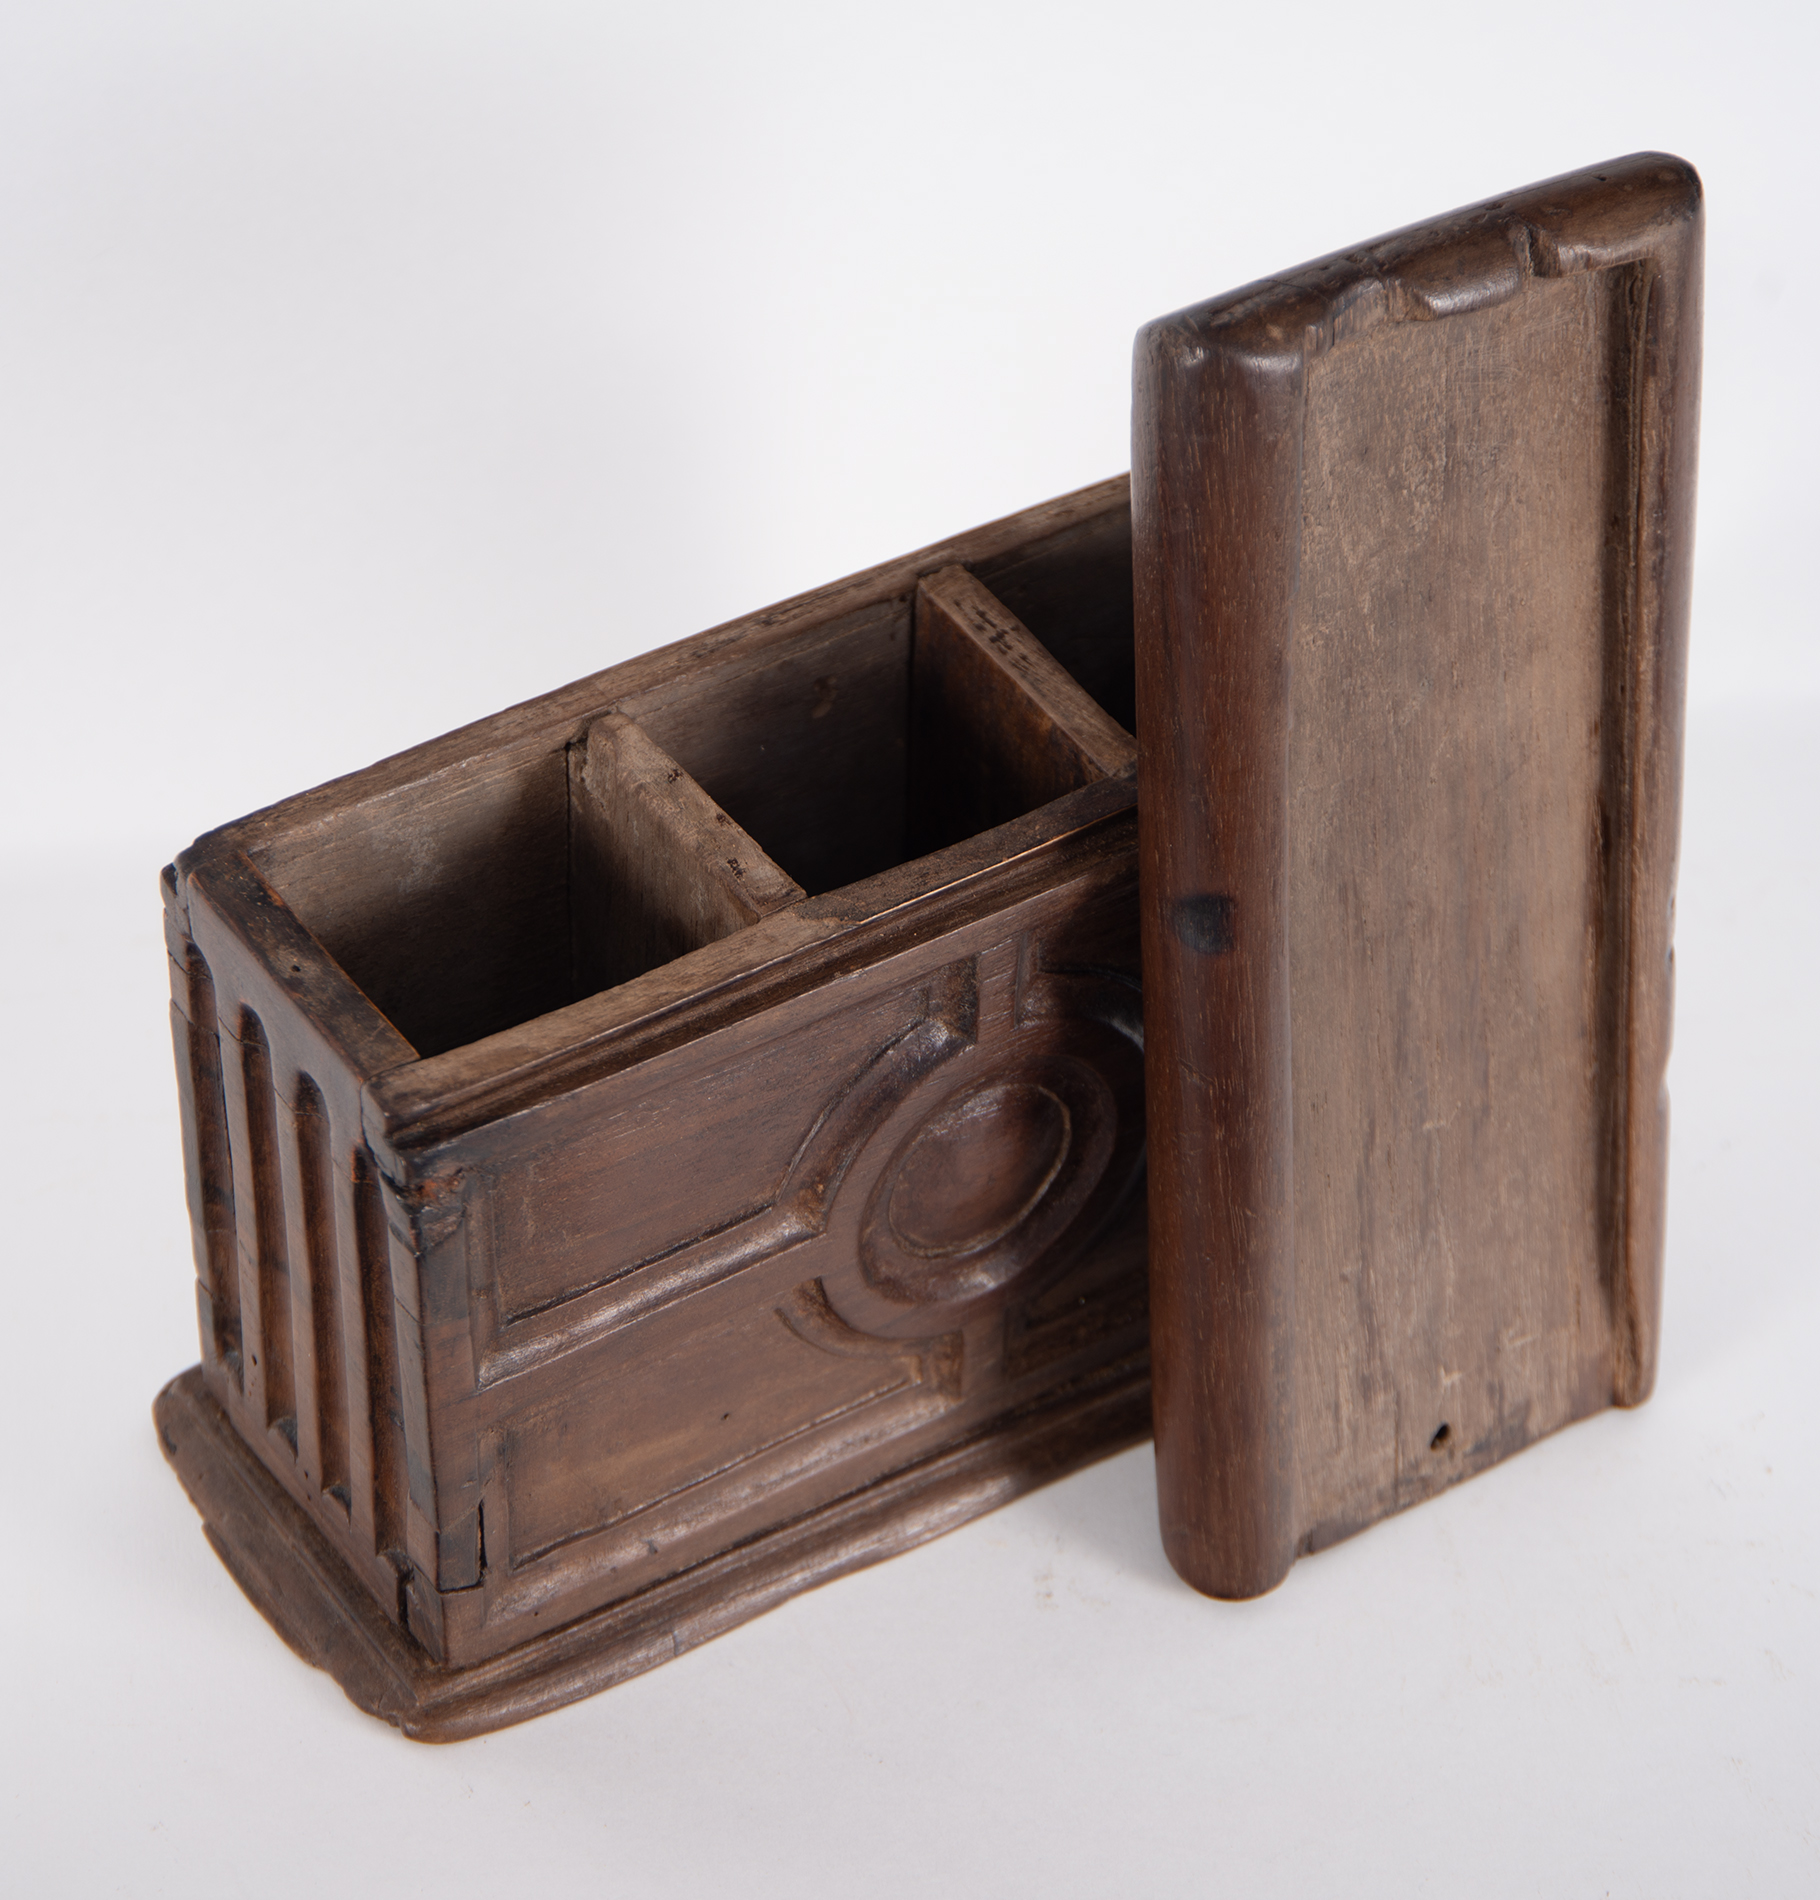 Box for the Holy Oils, Spanish school of the 17th century - Image 6 of 7